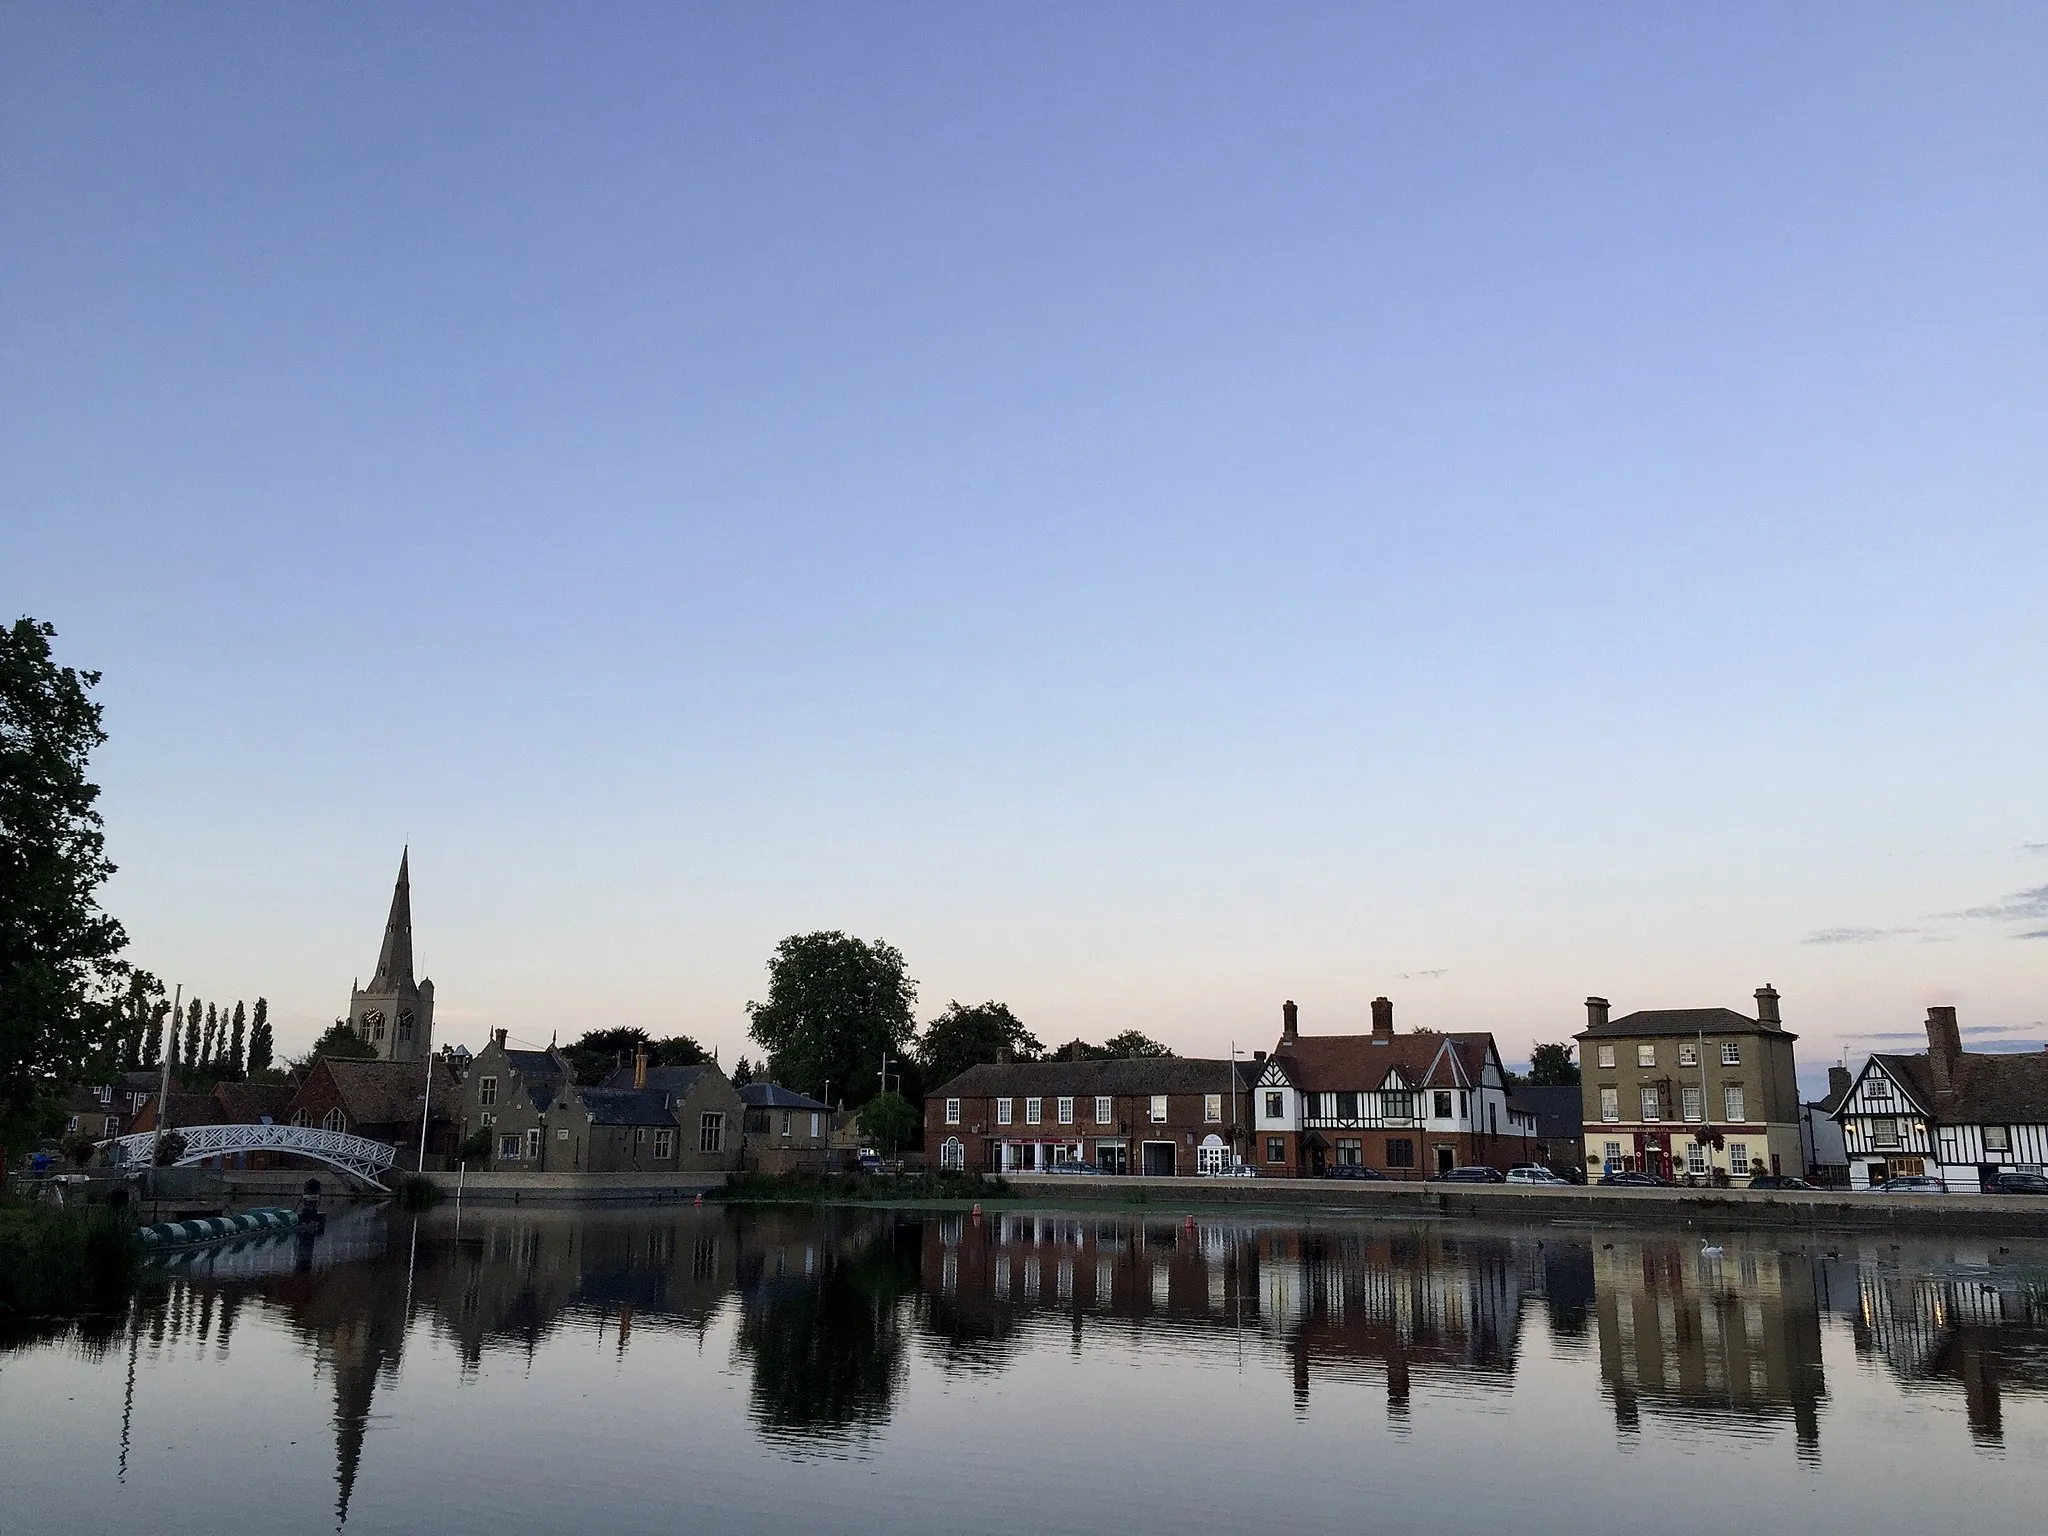 Photo showing: Godmanchester's Causeway, which overlooks the River Great Ouse